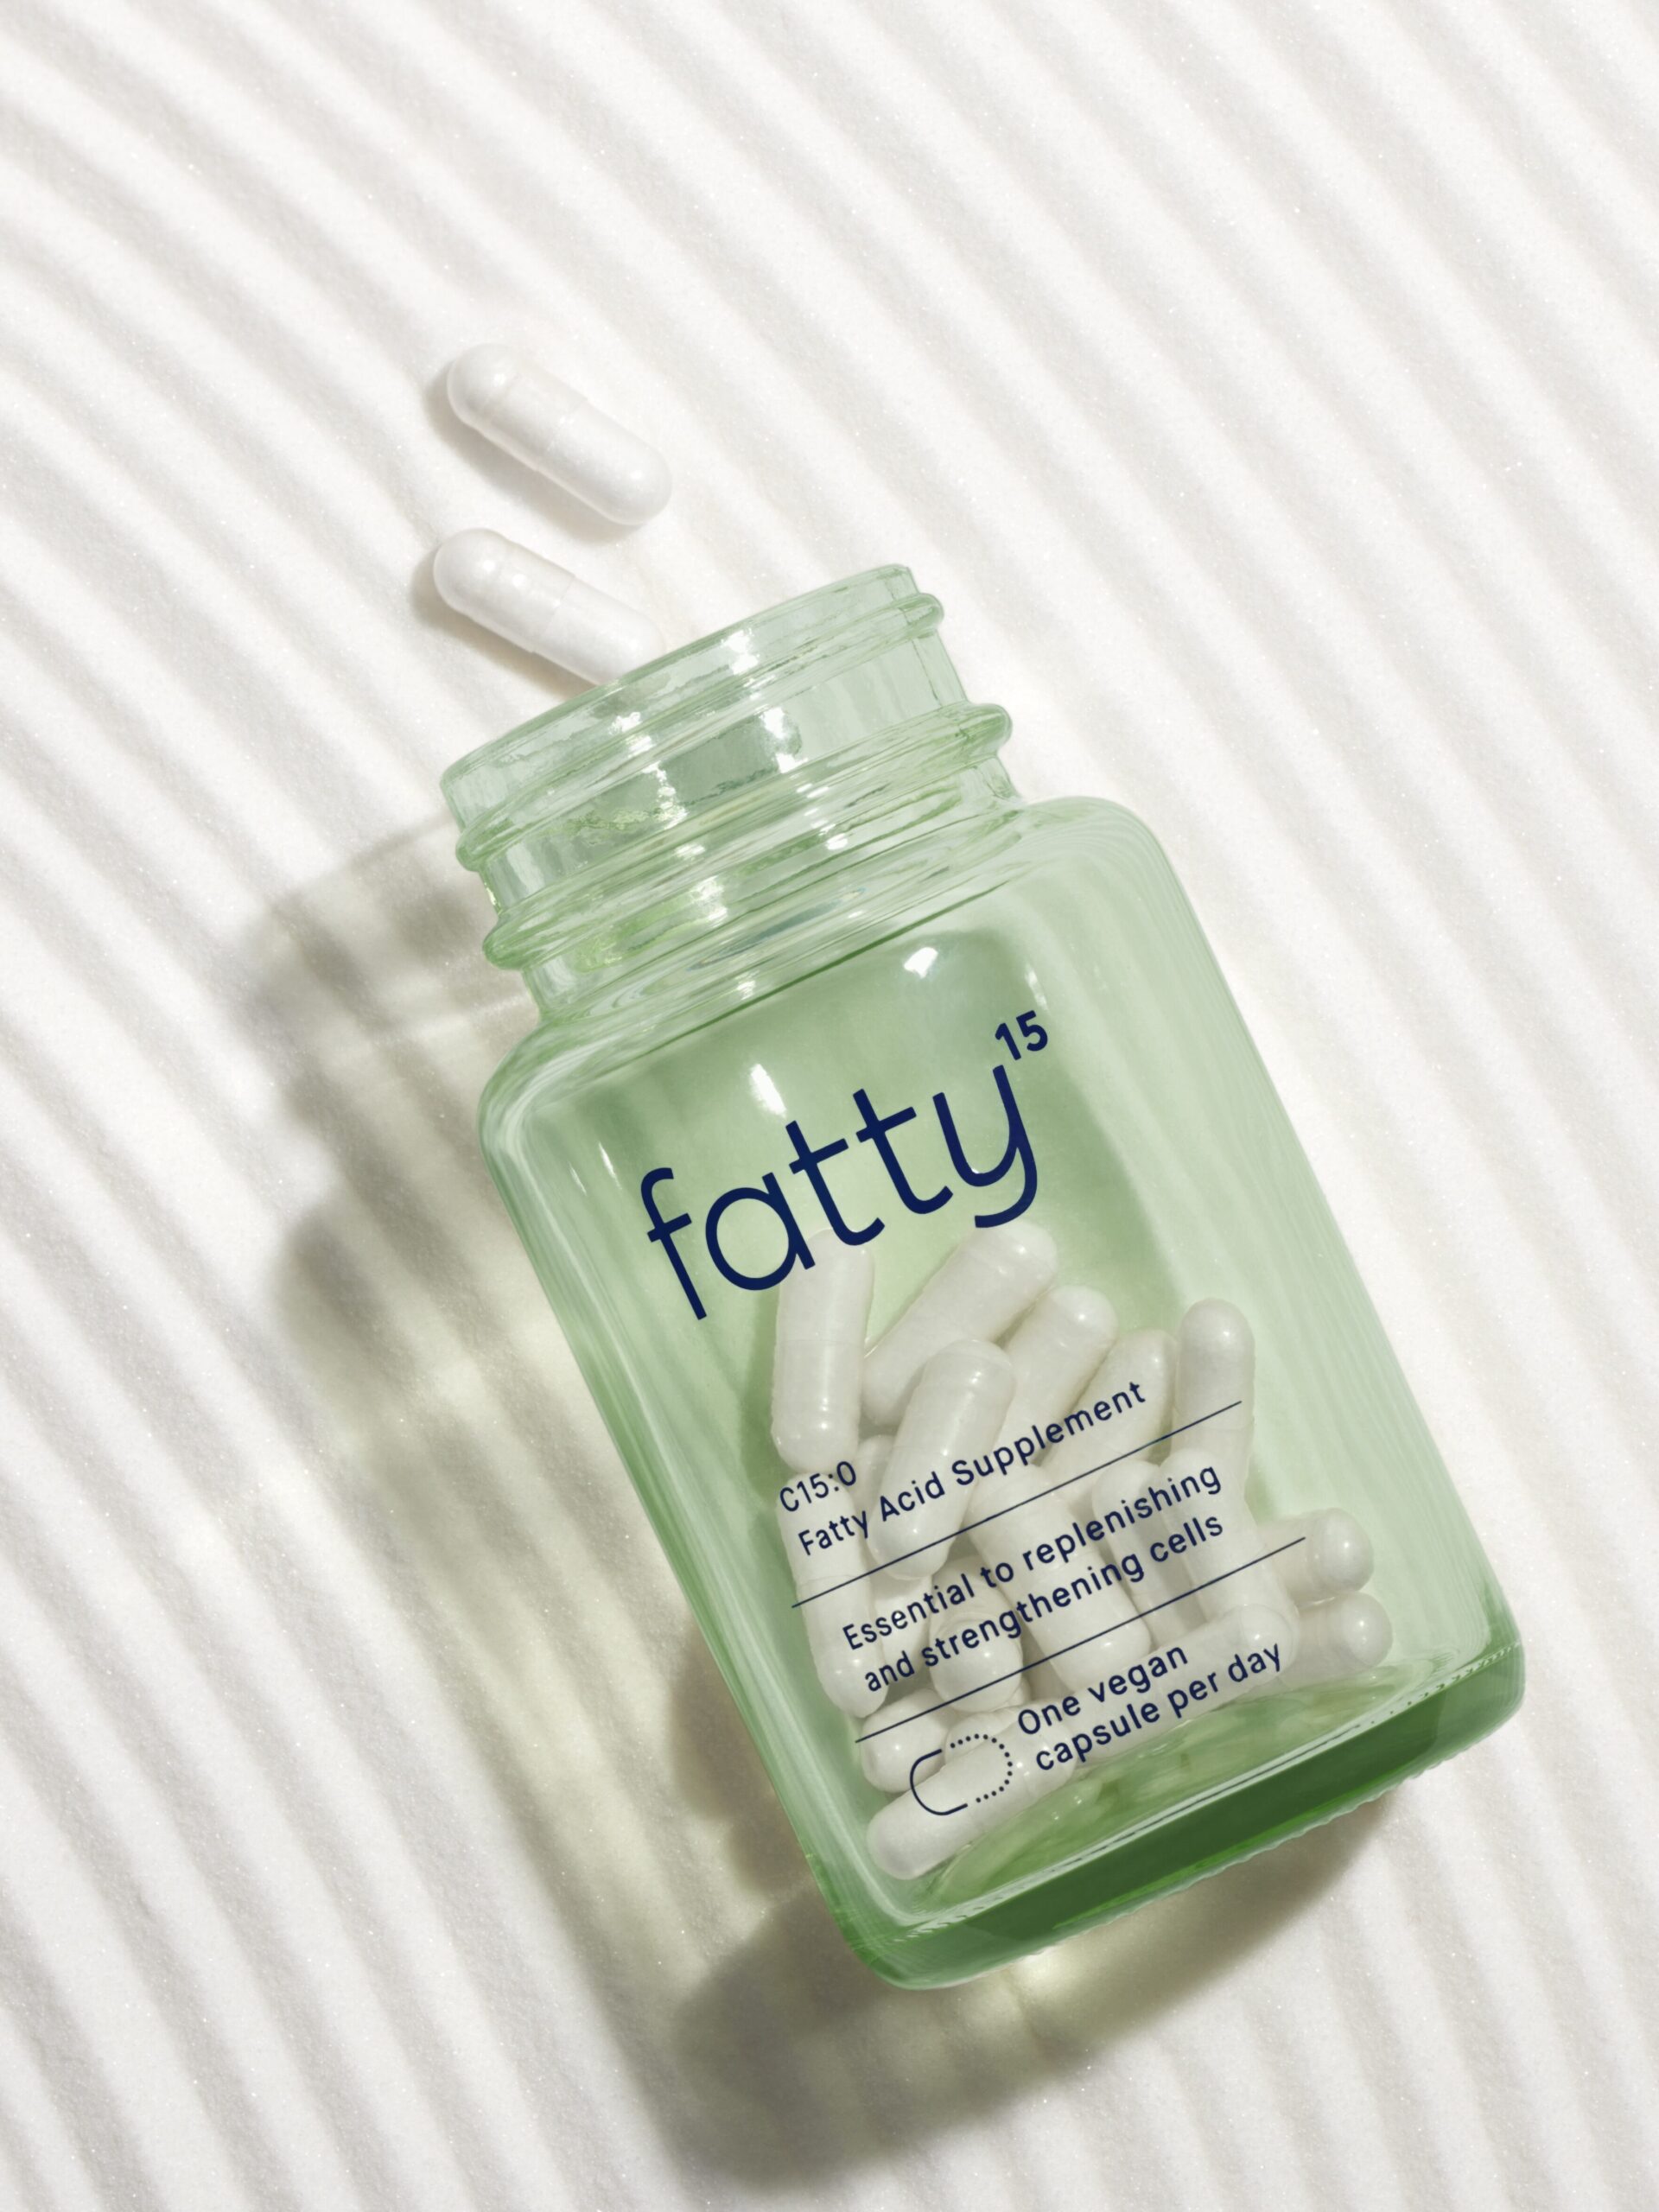 A green bottle labeled "fatty15" with white capsules spilling out. The label mentions it is a fatty acid supplement with one vegan capsule per day.